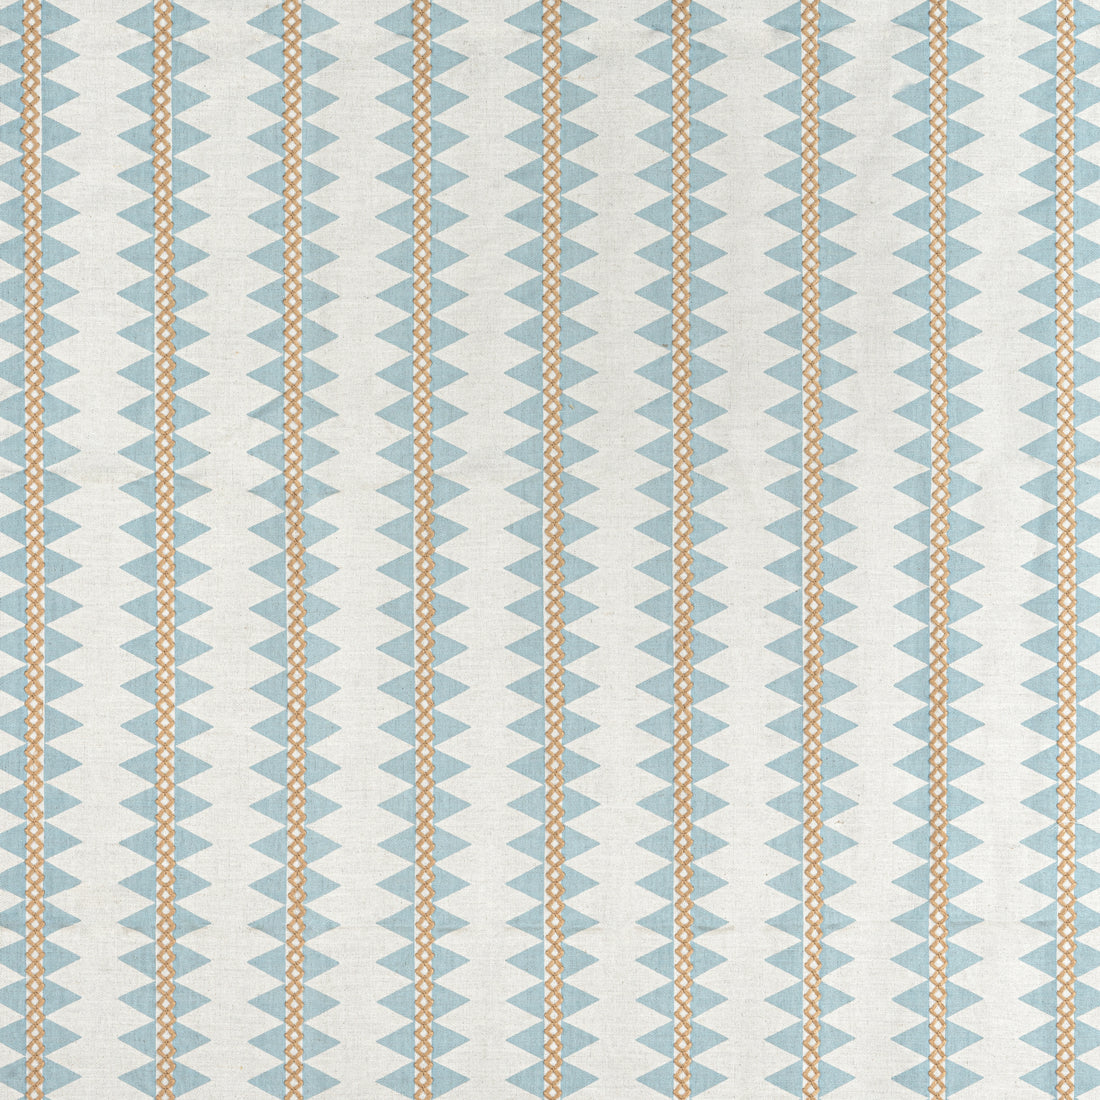 Reno Stripe Embroidery fabric in spa blue color - pattern number W713241 - by Thibaut in the Mesa Fabrics collection